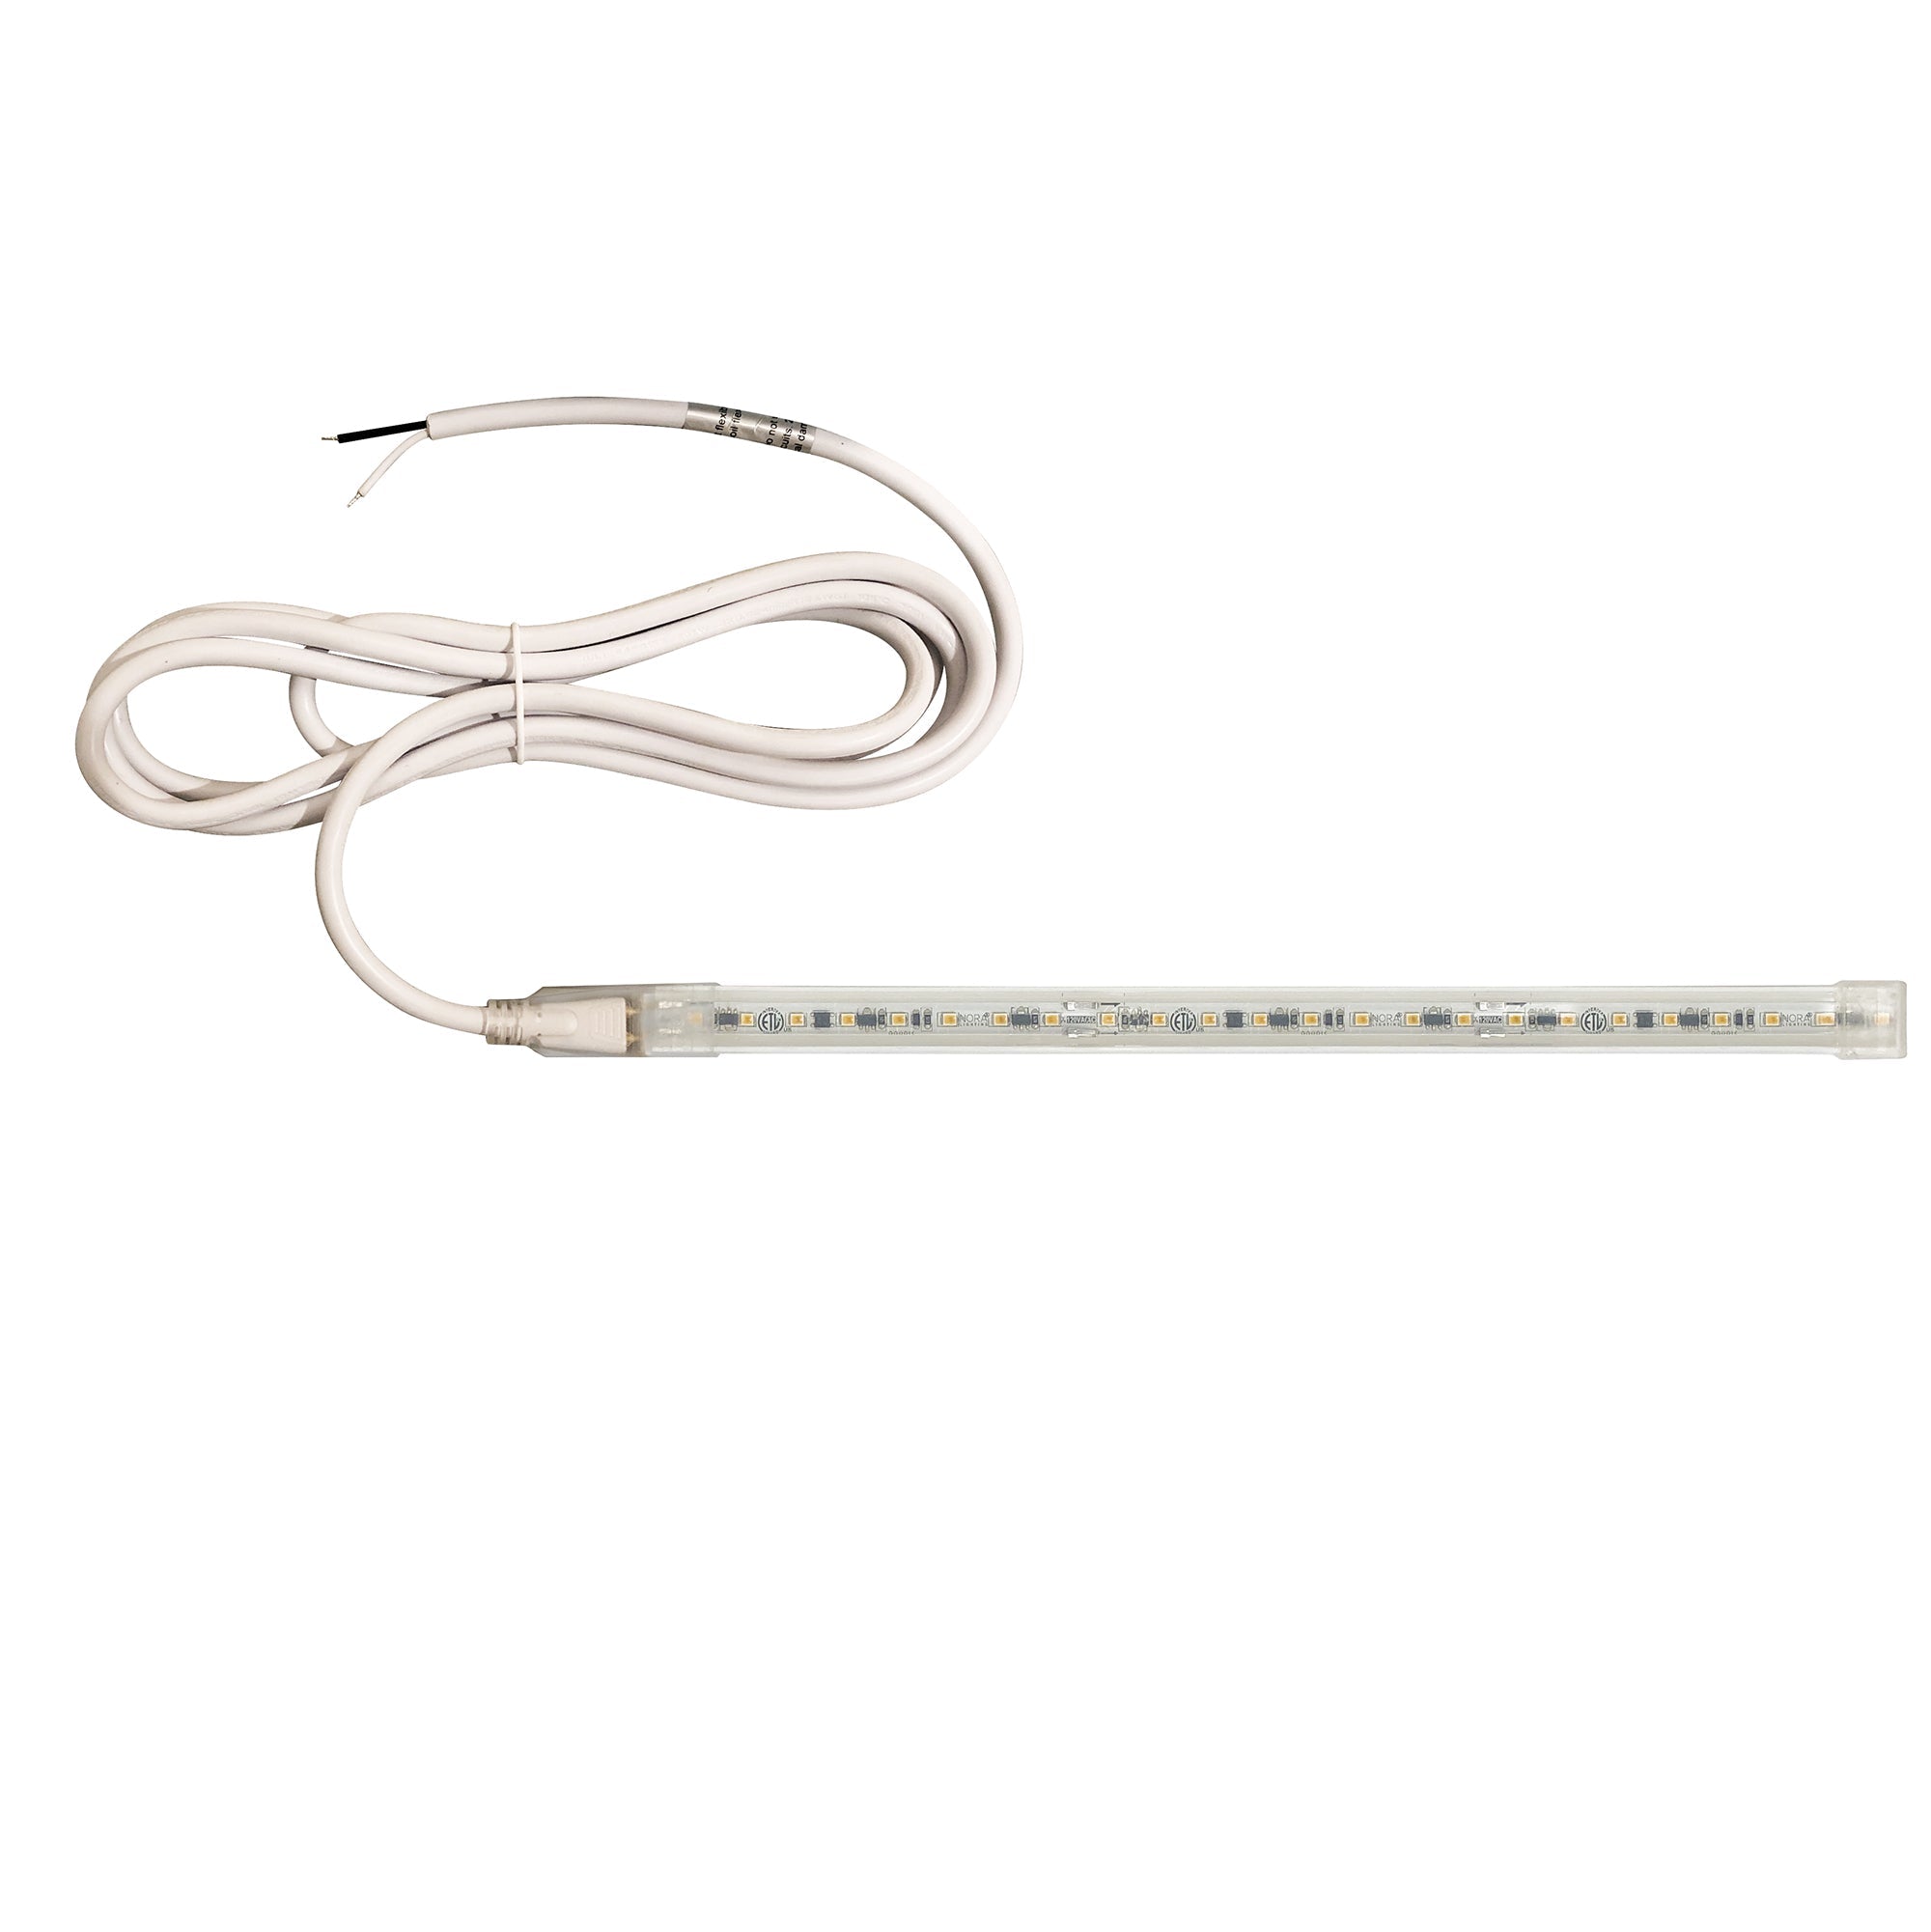 Nora Lighting NUTP13-W64-12-927/HW - Accent / Undercabinet - Custom Cut 64-ft 120V Continuous LED Tape Light, 330lm / 3.6W per foot, 2700K, w/ Mounting Clips and 8' Hardwired Power Cord